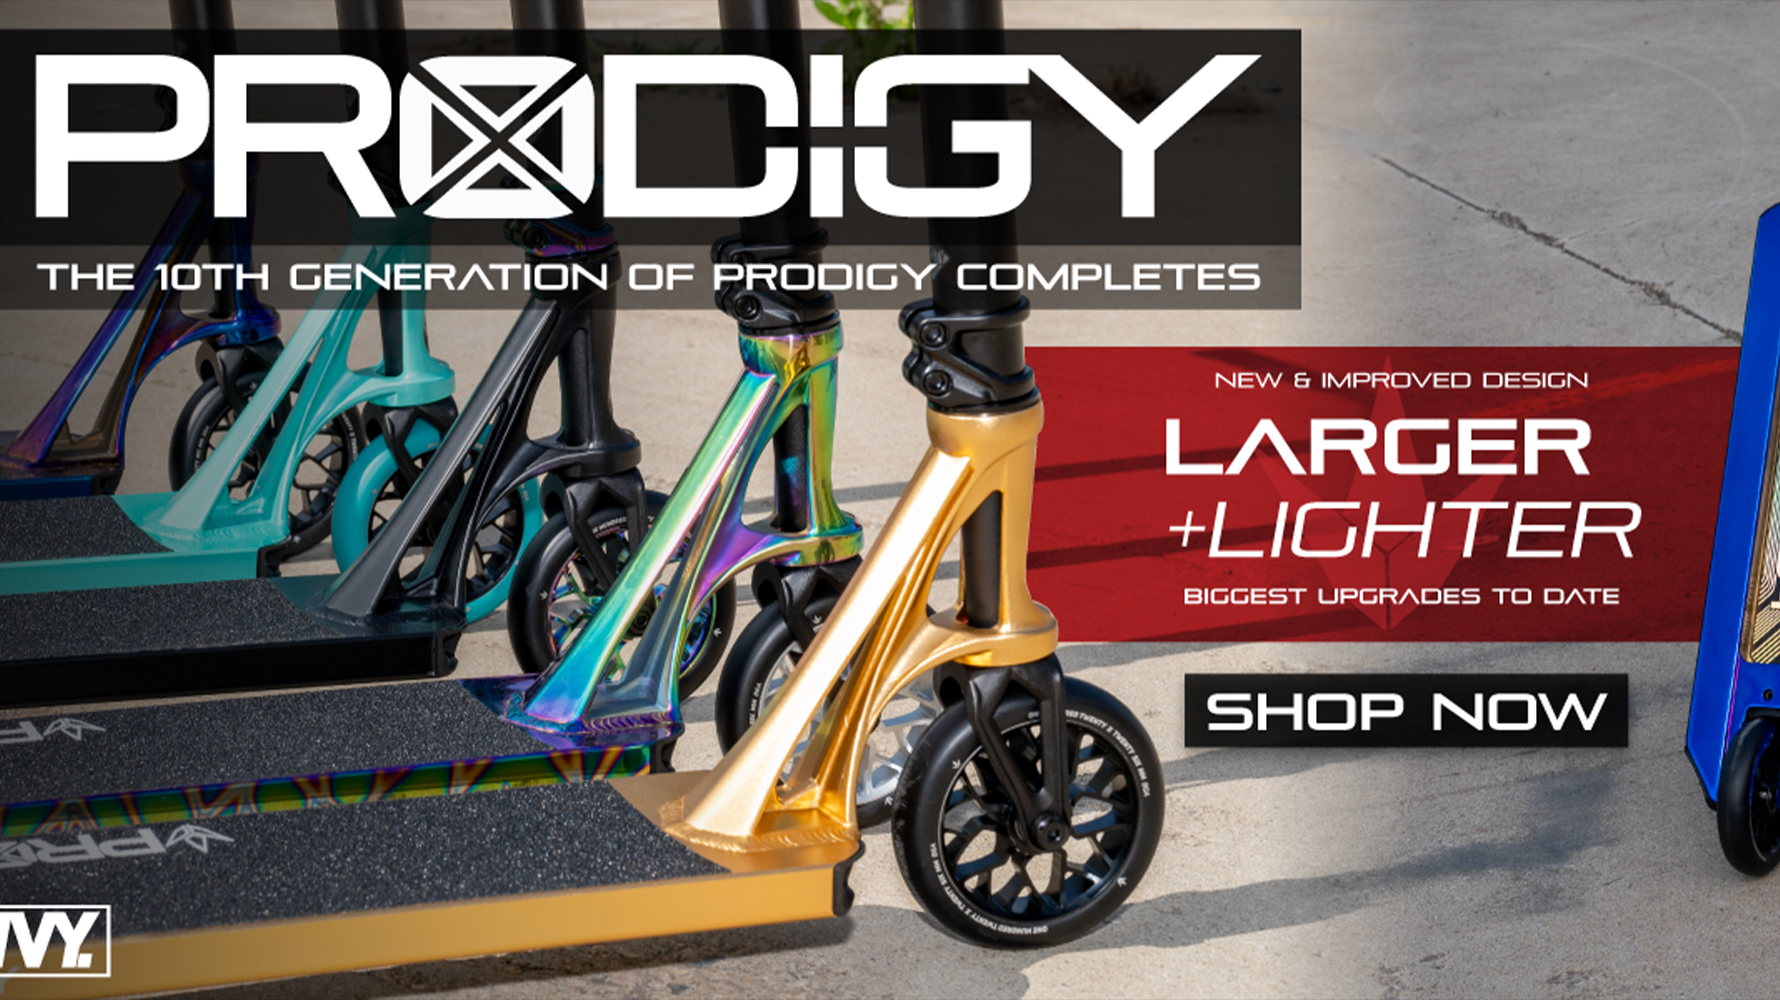 Introducing the new Envy Prodigy X & X Street